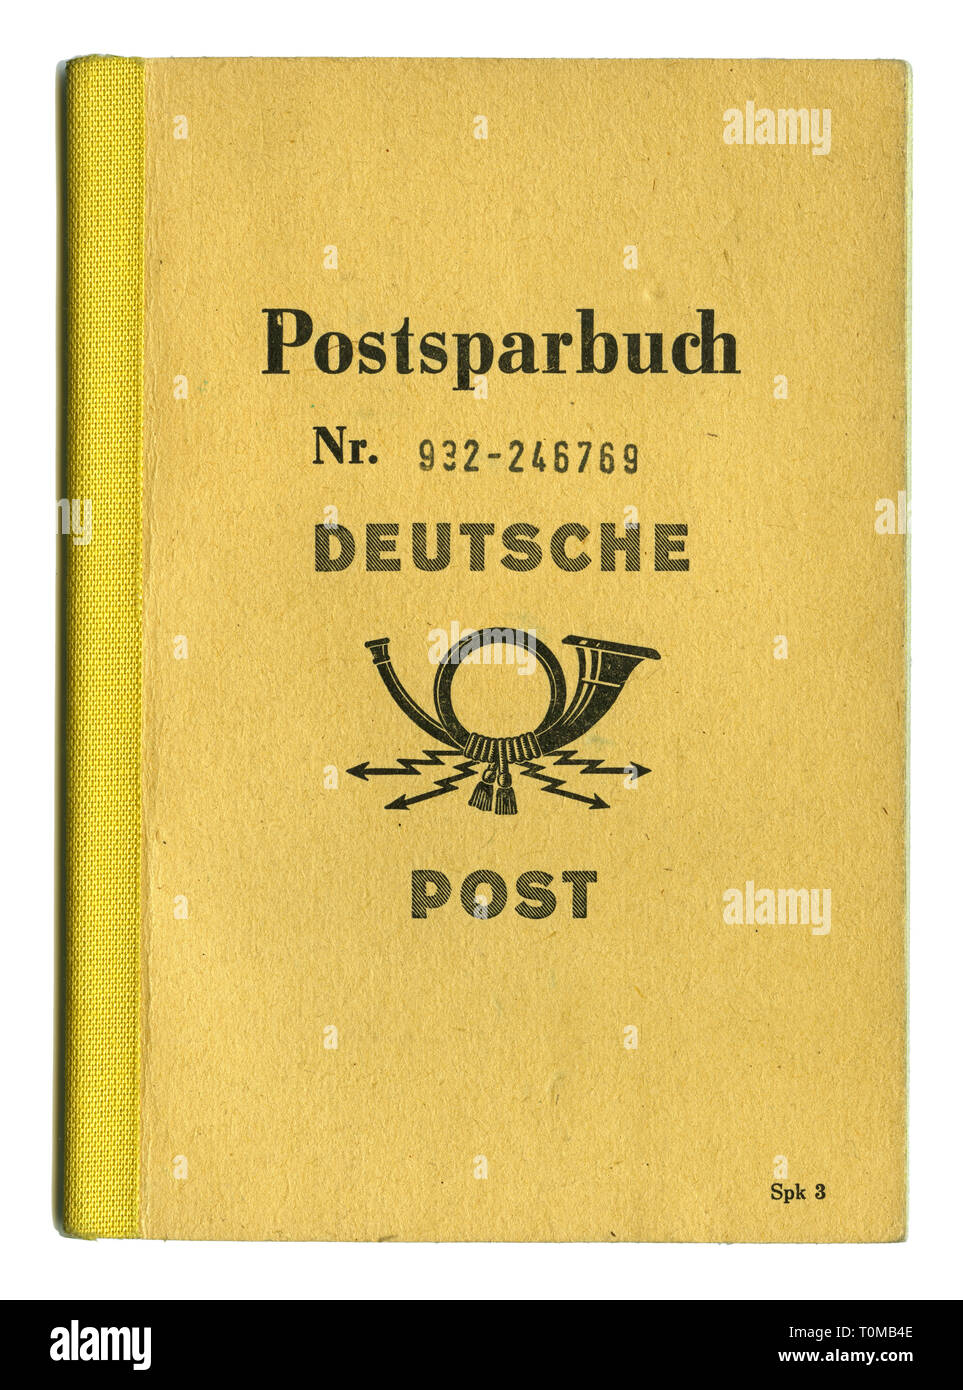 Mail, risparmio postale libro, East-Germany, 1972, Additional-Rights-Clearance-Info-Not-Available Foto Stock